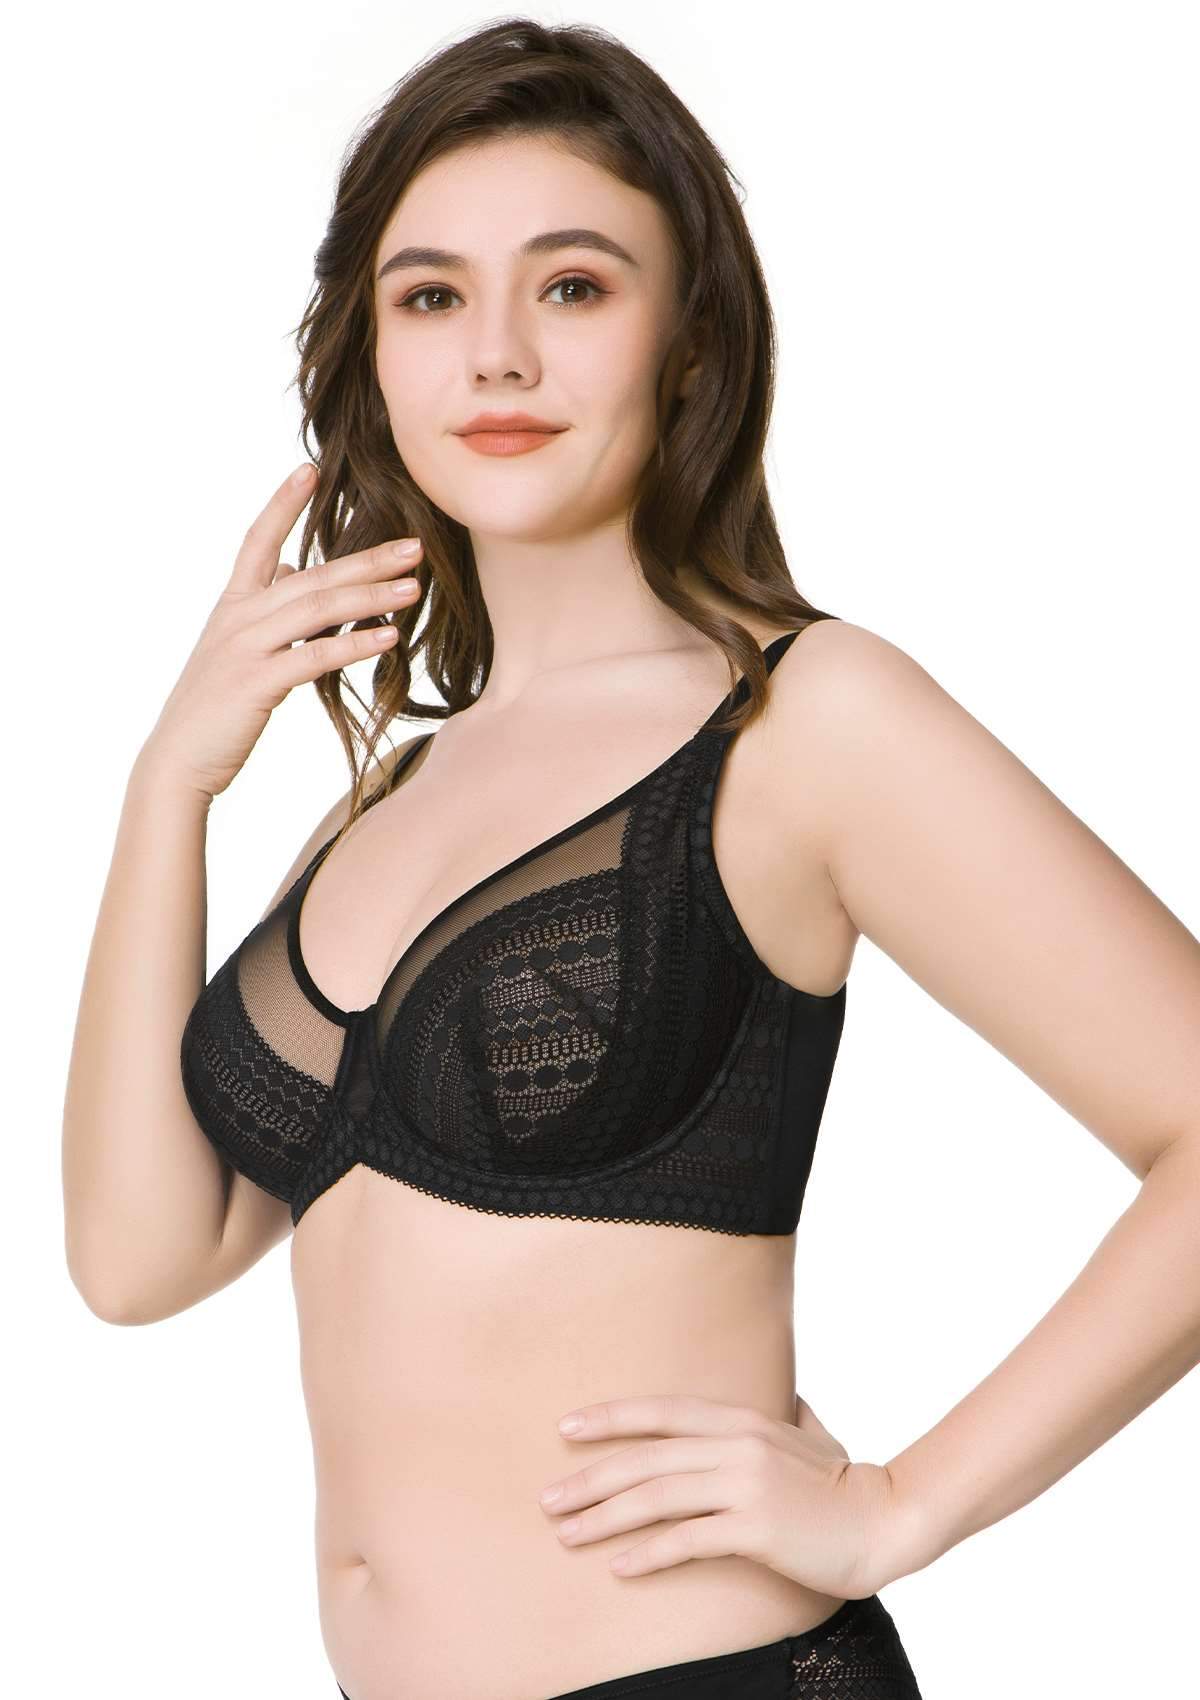 HSIA Heroine Matching Bra And Panties: Unlined Lace Unpadded Bra - Black / 40 / D